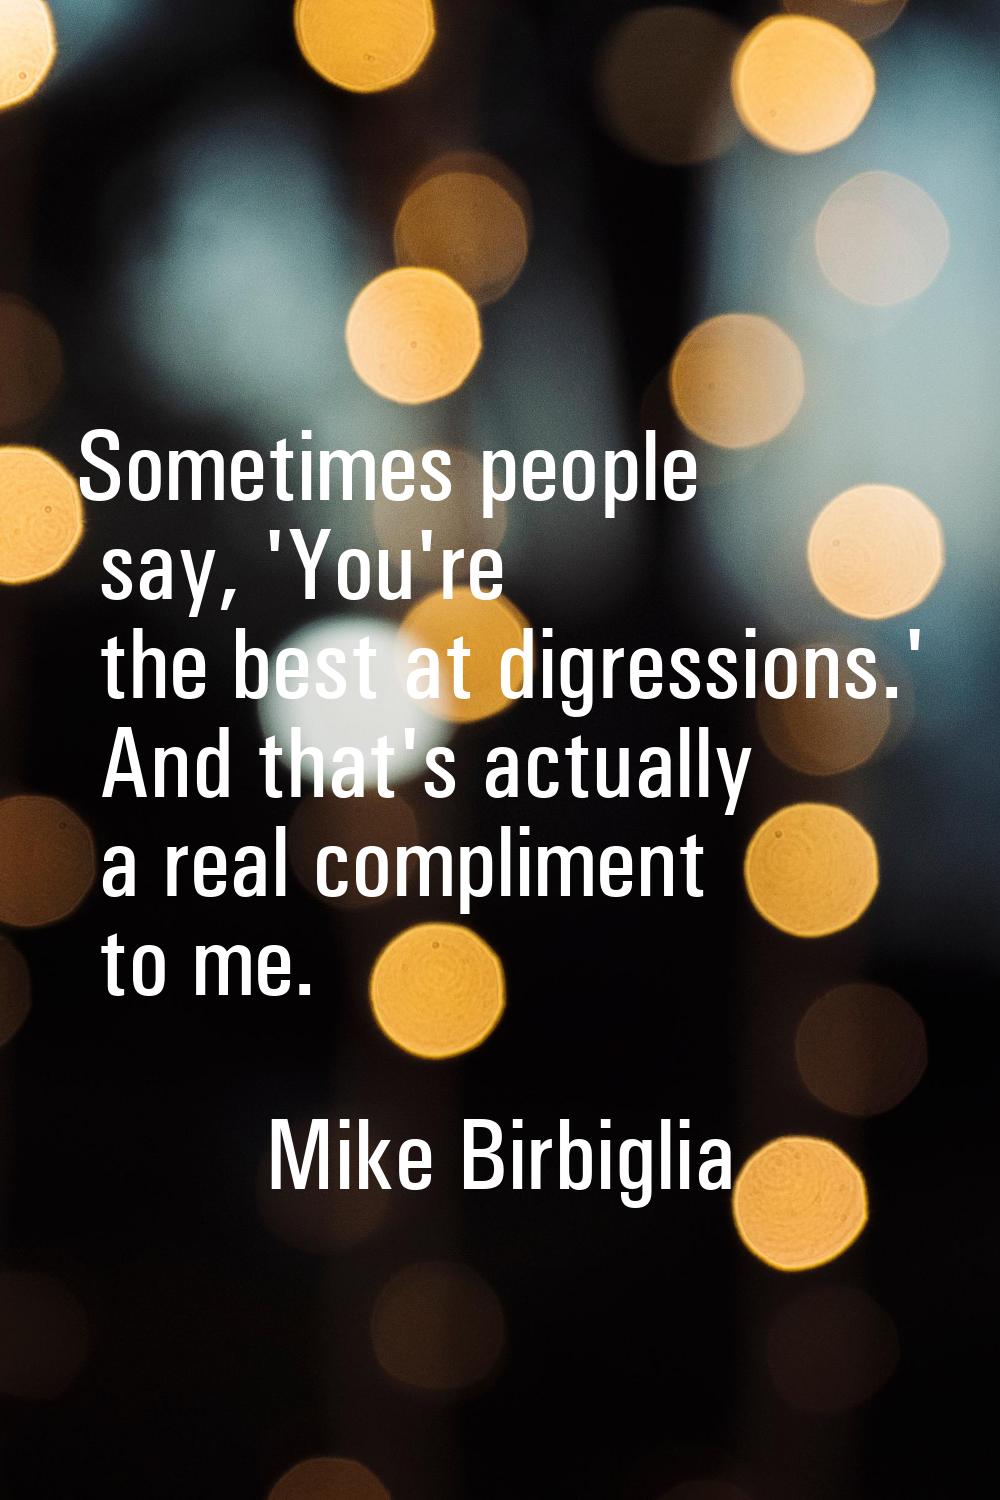 Sometimes people say, 'You're the best at digressions.' And that's actually a real compliment to me